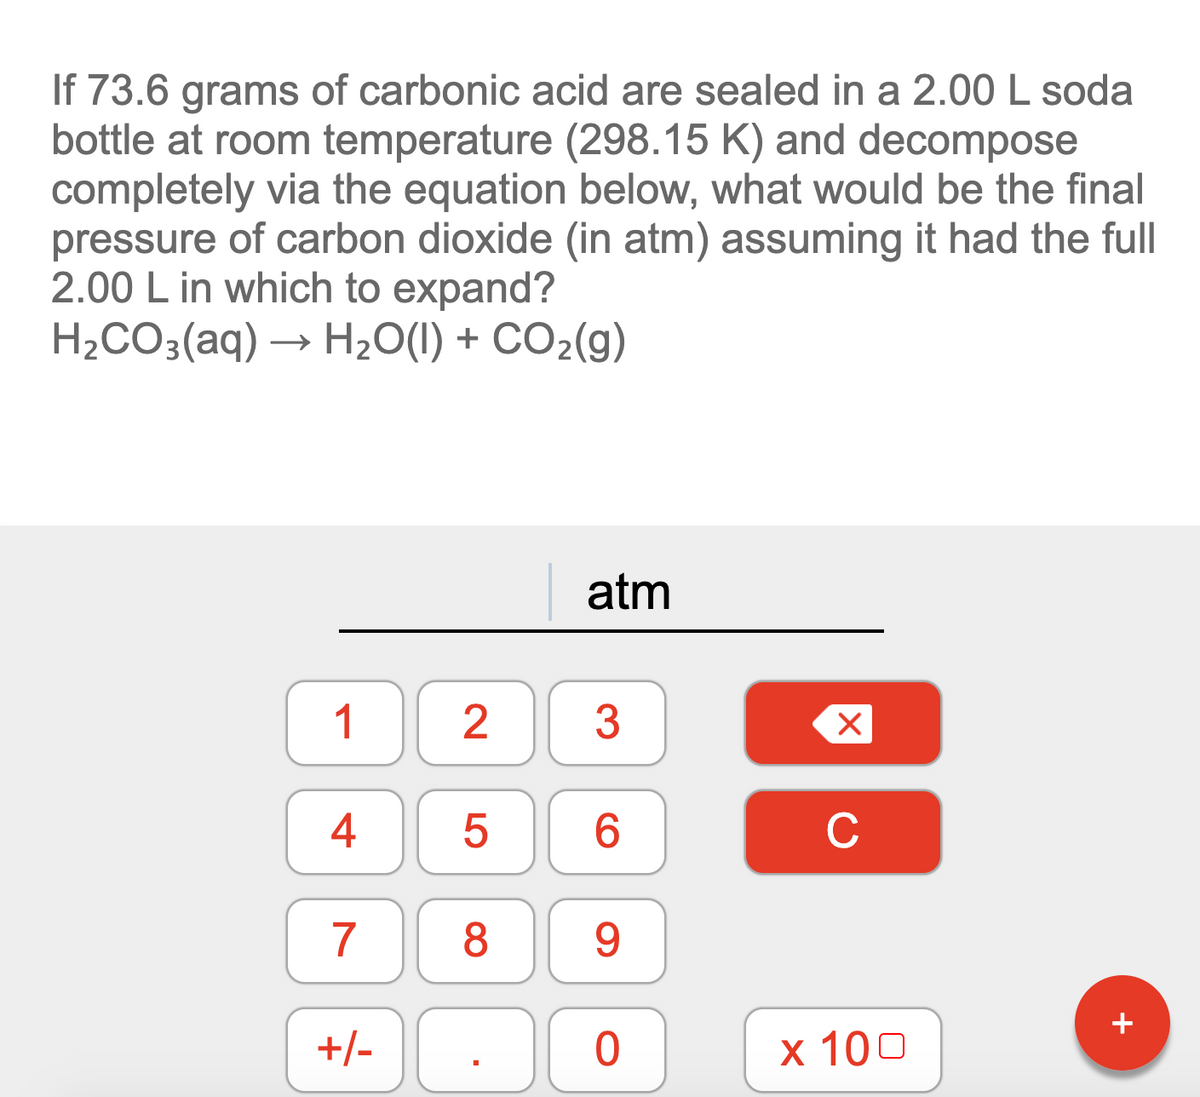 If 73.6 grams of carbonic acid are sealed in a 2.00 L soda
bottle at room temperature (298.15 K) and decompose
completely via the equation below, what would be the final
pressure of carbon dioxide (in atm) assuming it had the full
2.00 L in which to expand?
H2CO3(aq) → H20(1) + CO2(g)
atm
1 2
4
6.
C
7
8
9.
+/- .
+
х 100
LO
